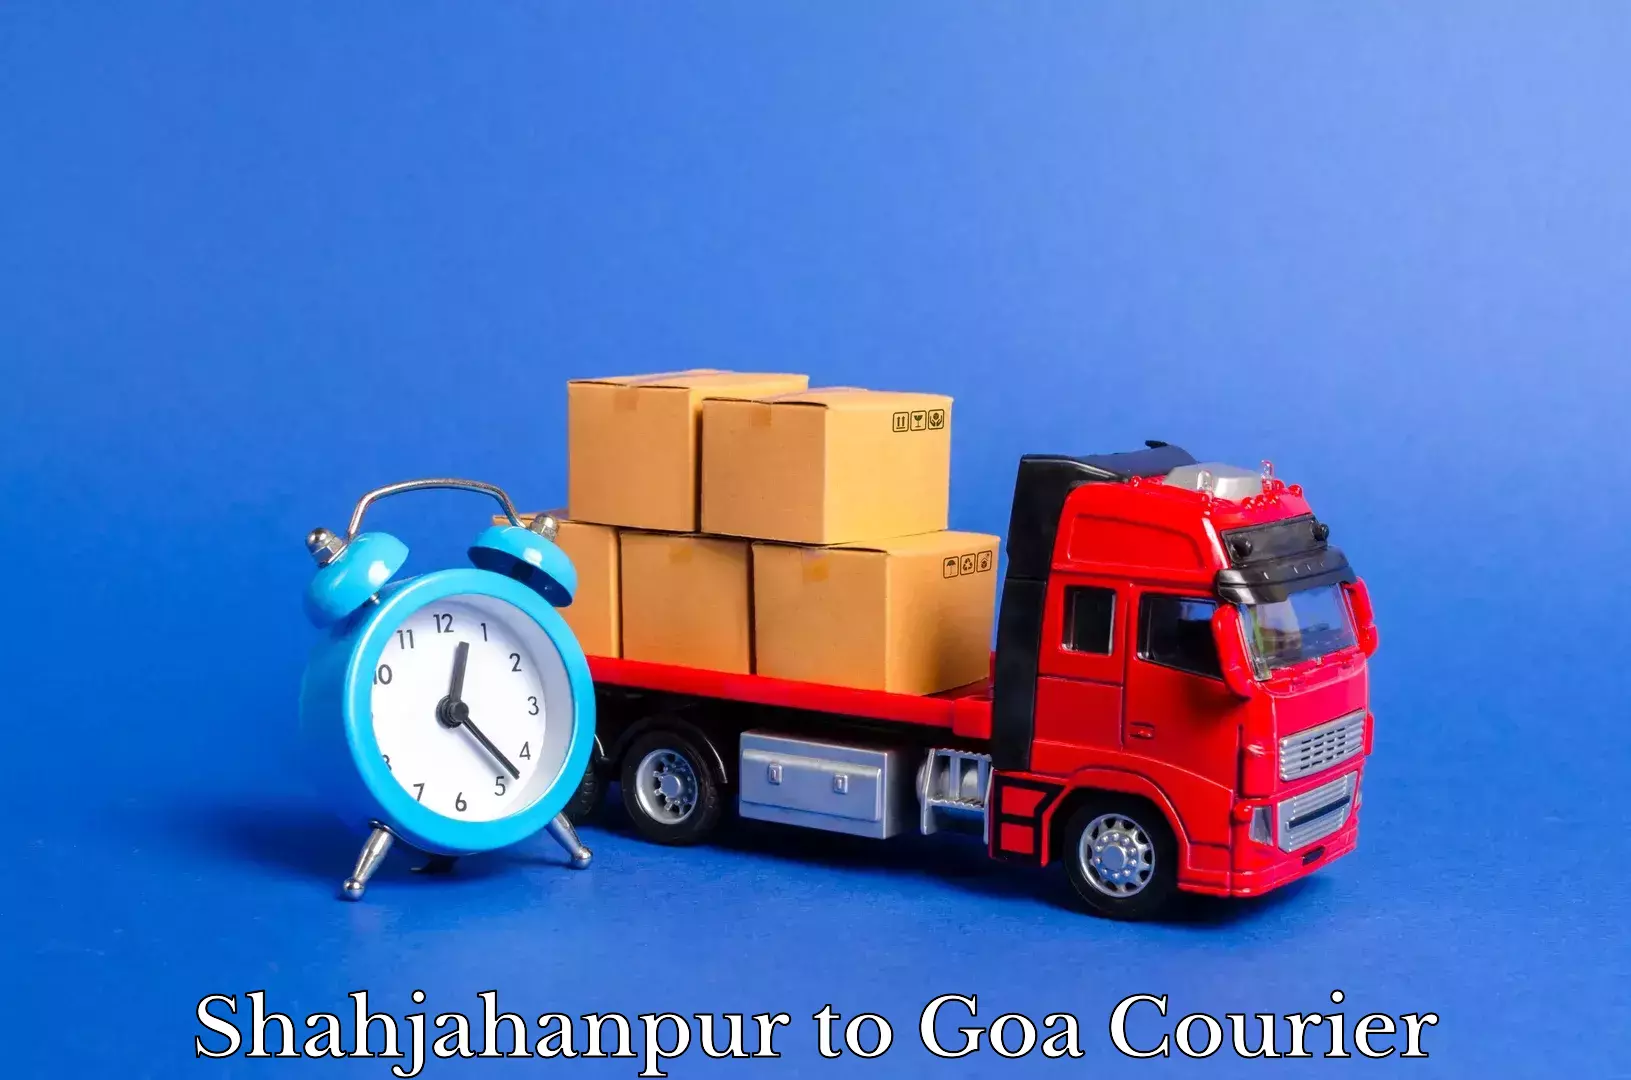 Professional movers Shahjahanpur to Goa